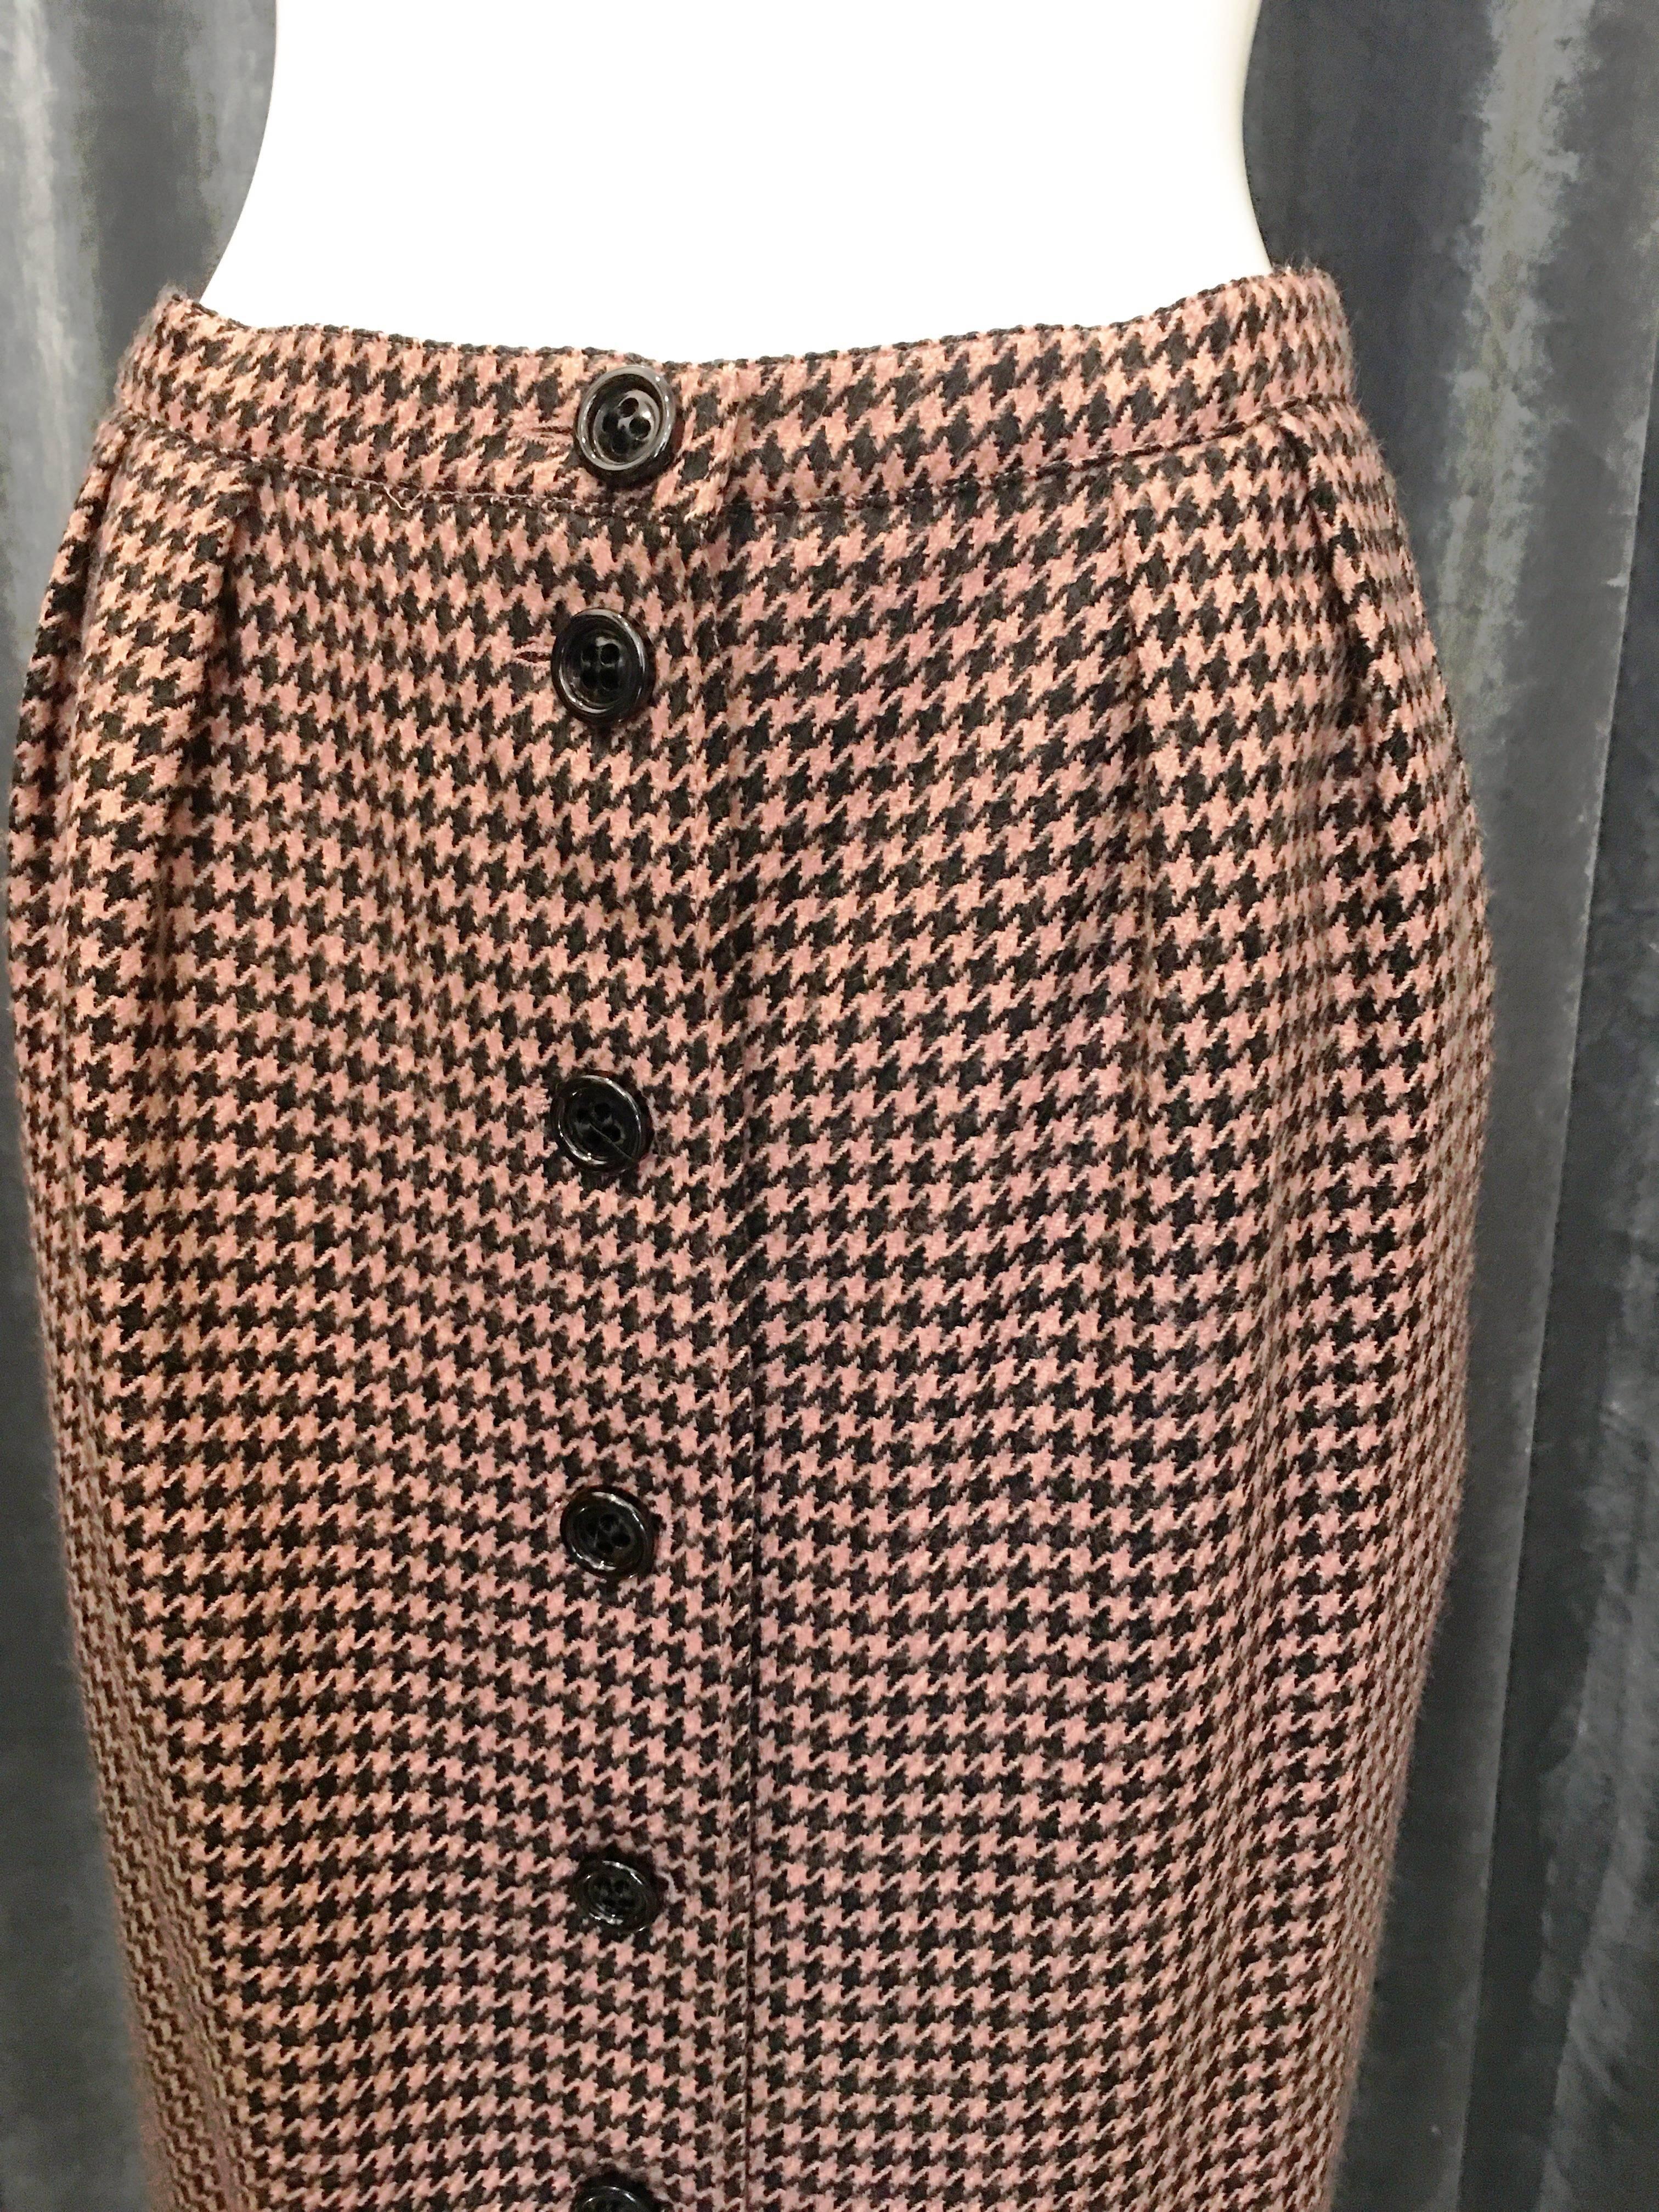 1990s Guy Laroche Pink/Black Houndstooth Skirt In Excellent Condition For Sale In Brooklyn, NY